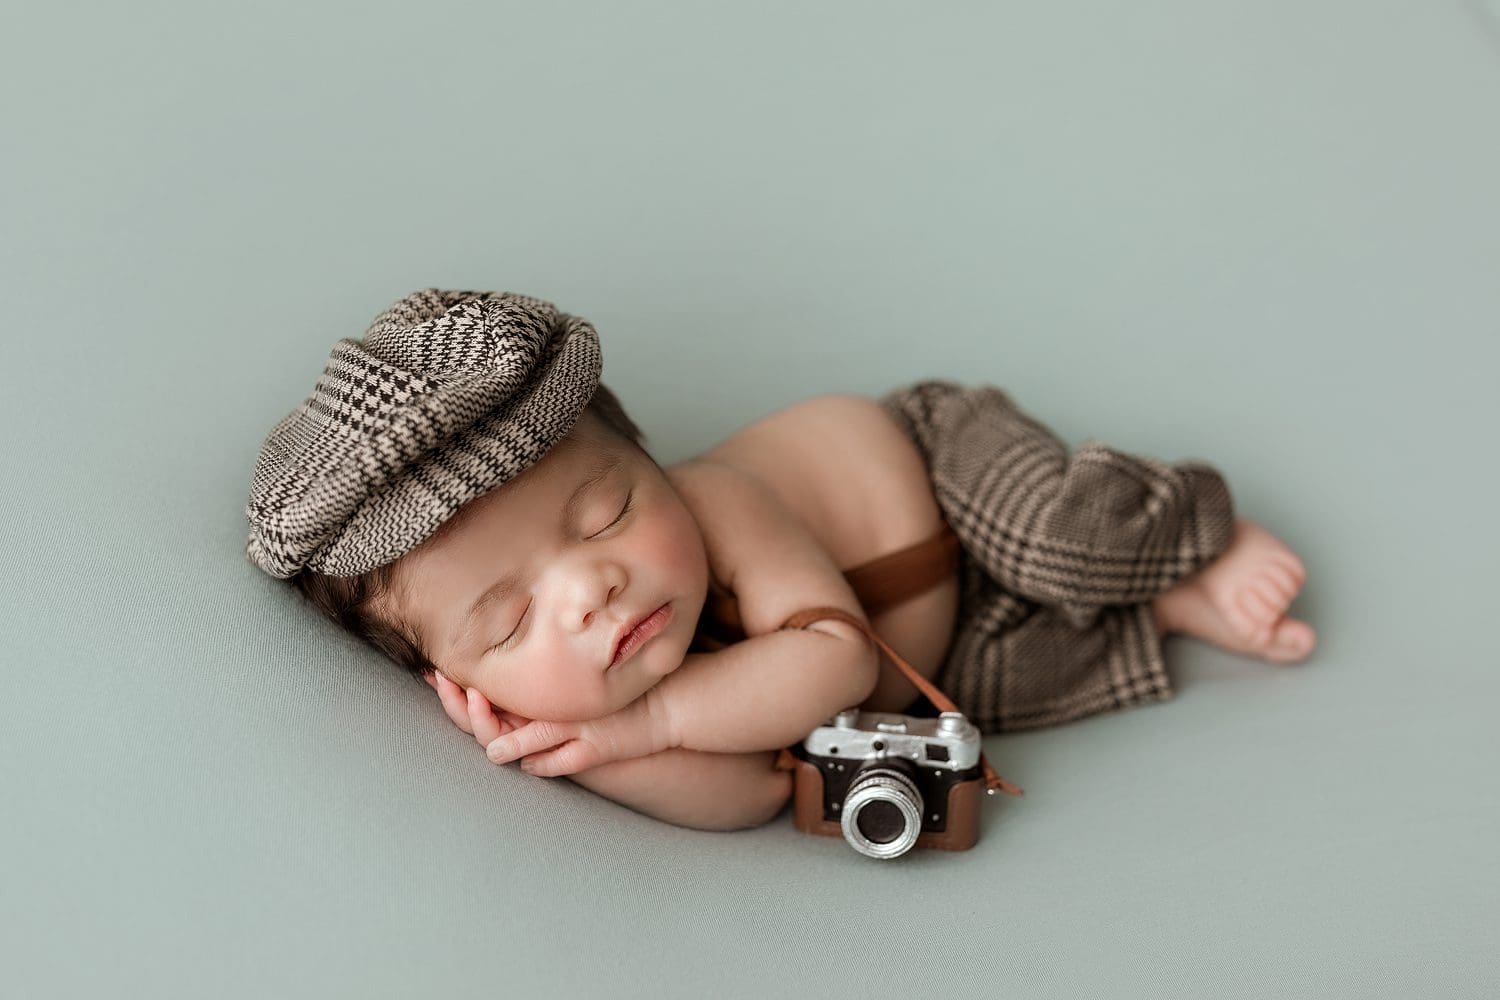 newborn baby holding a camera prop while being photographed